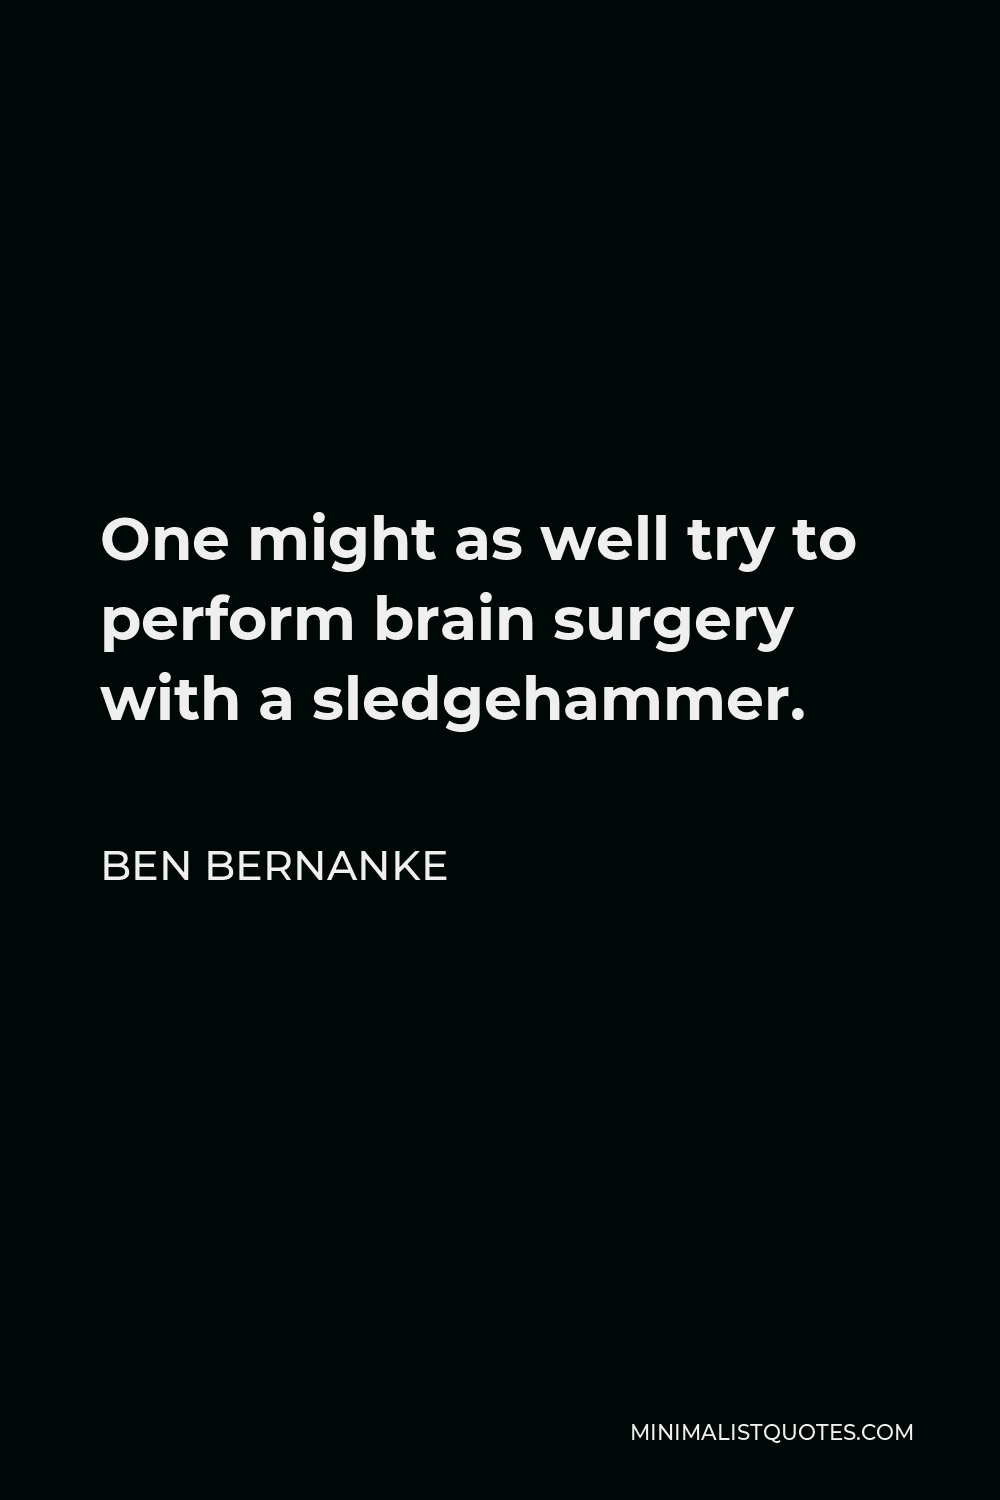 Ben Bernanke Quote - One might as well try to perform brain surgery with a sledgehammer.